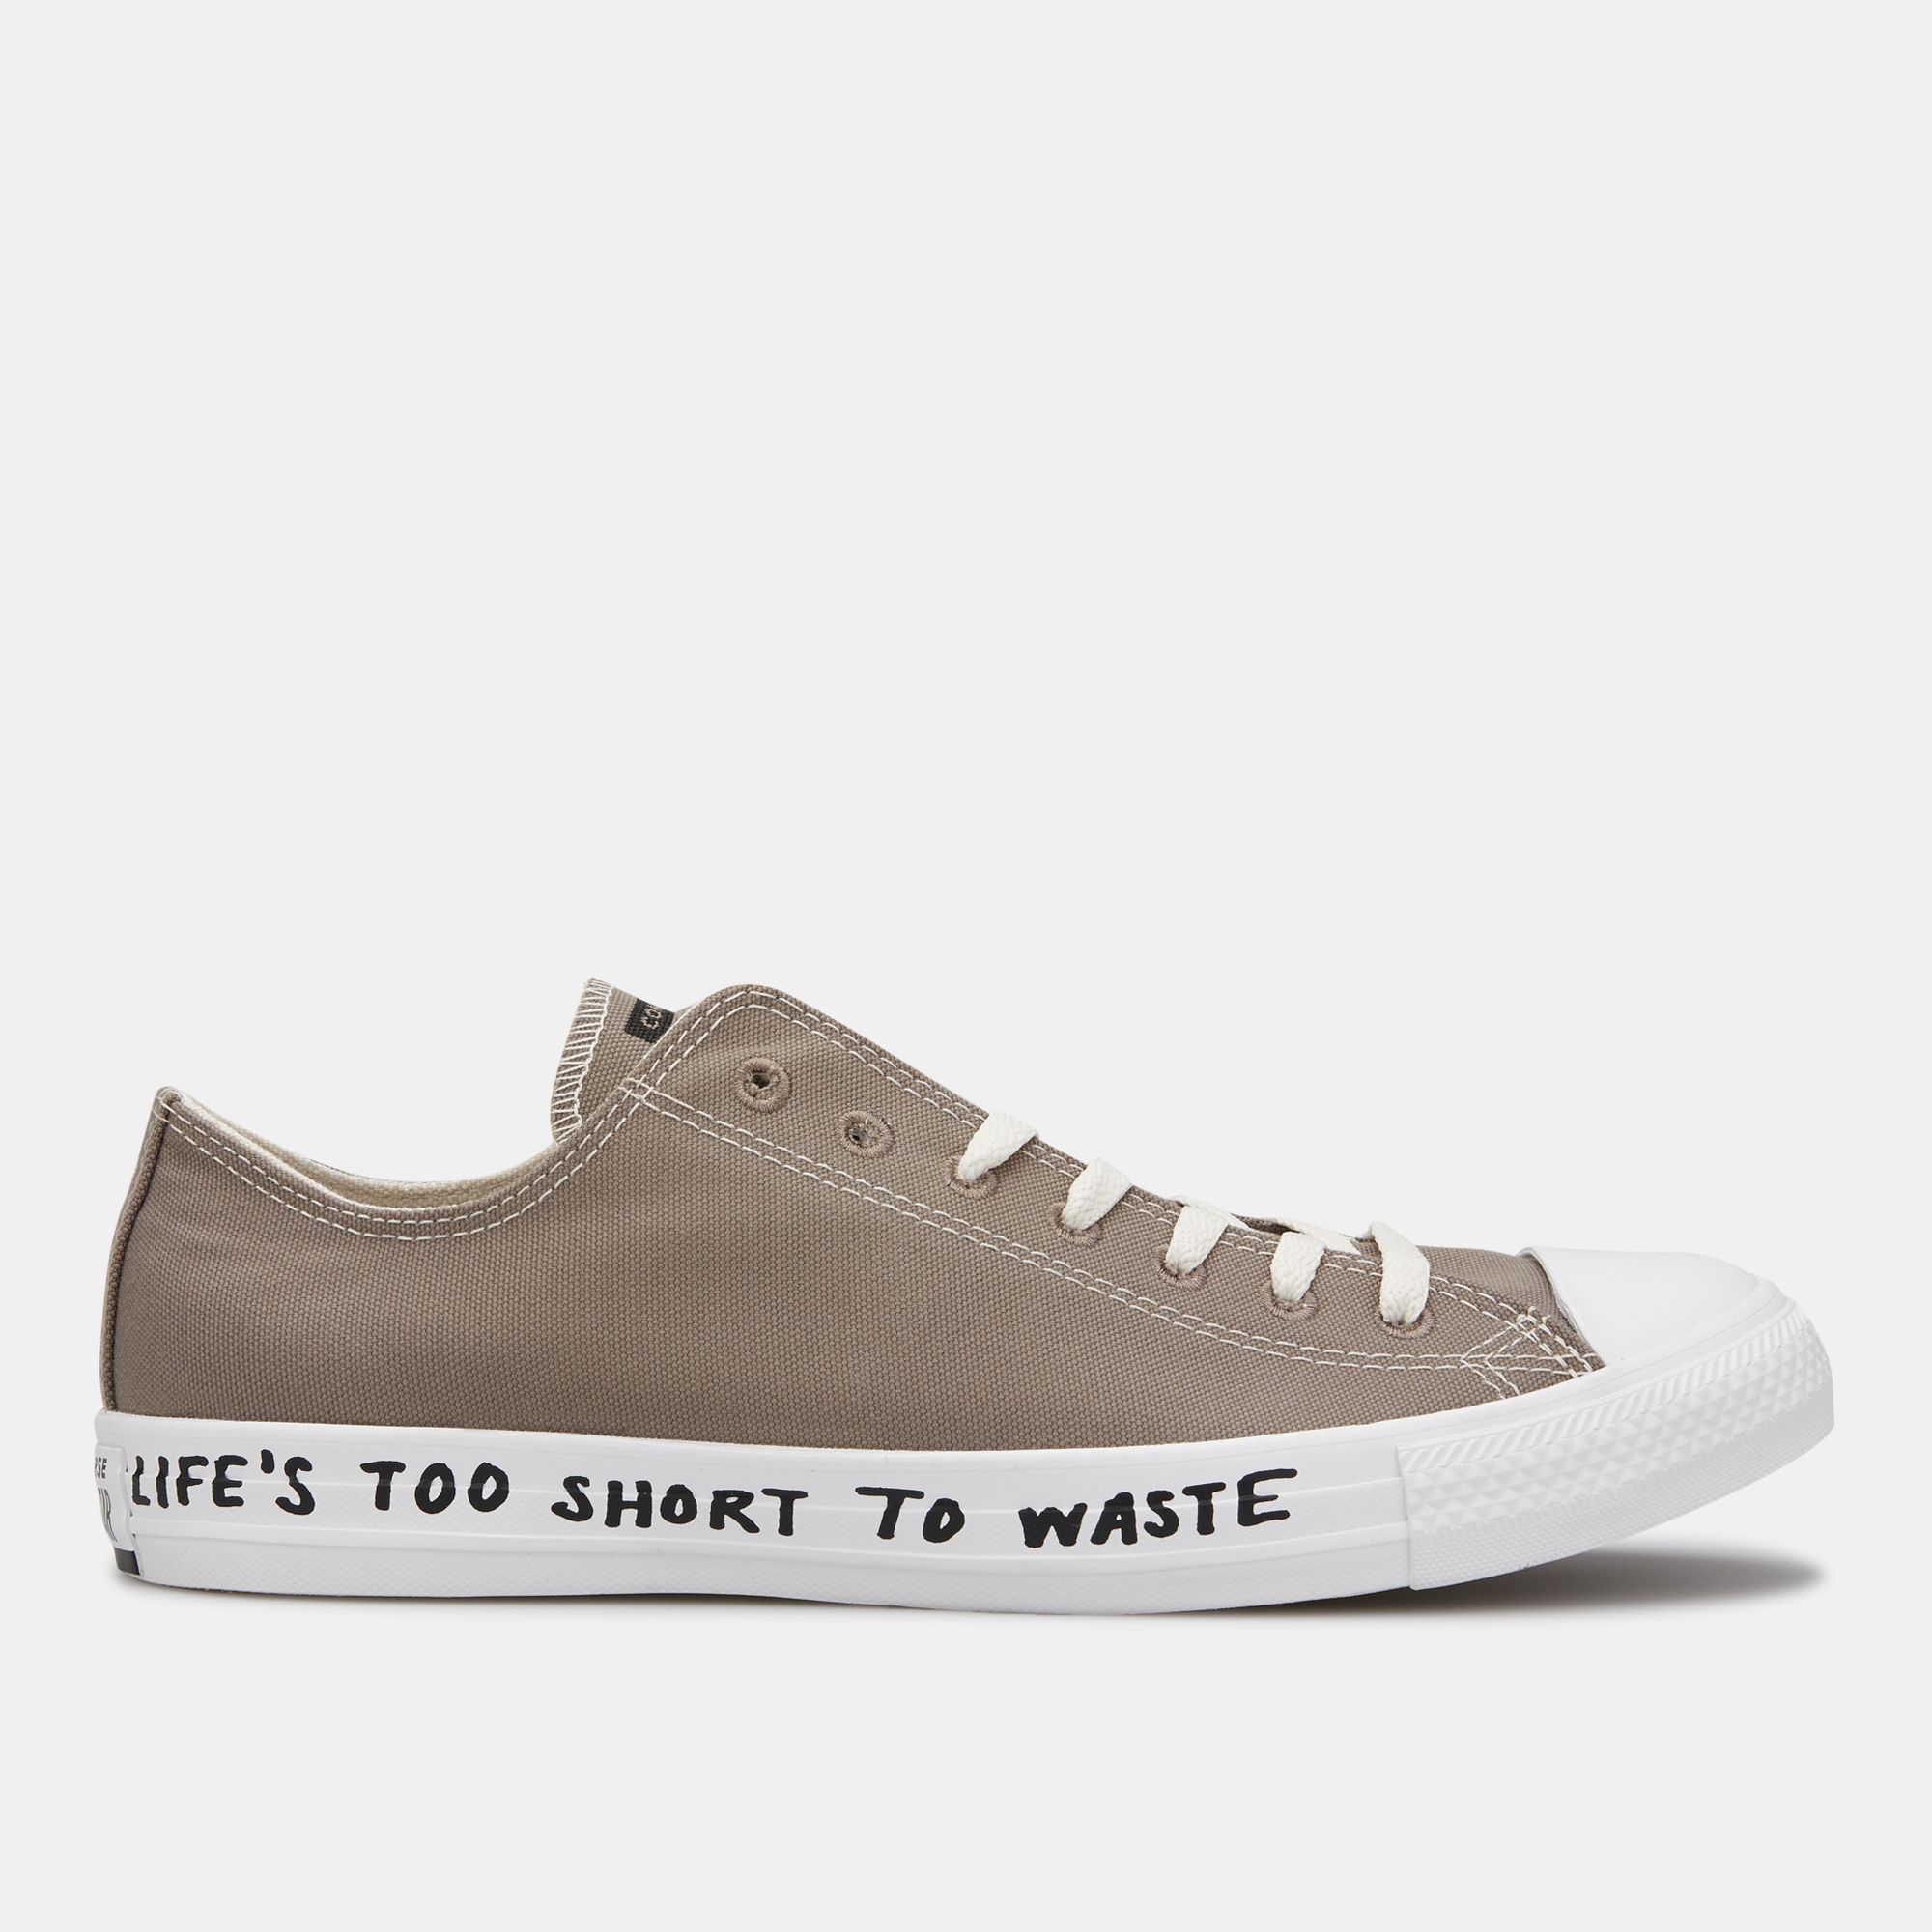 converse life's too short to waste